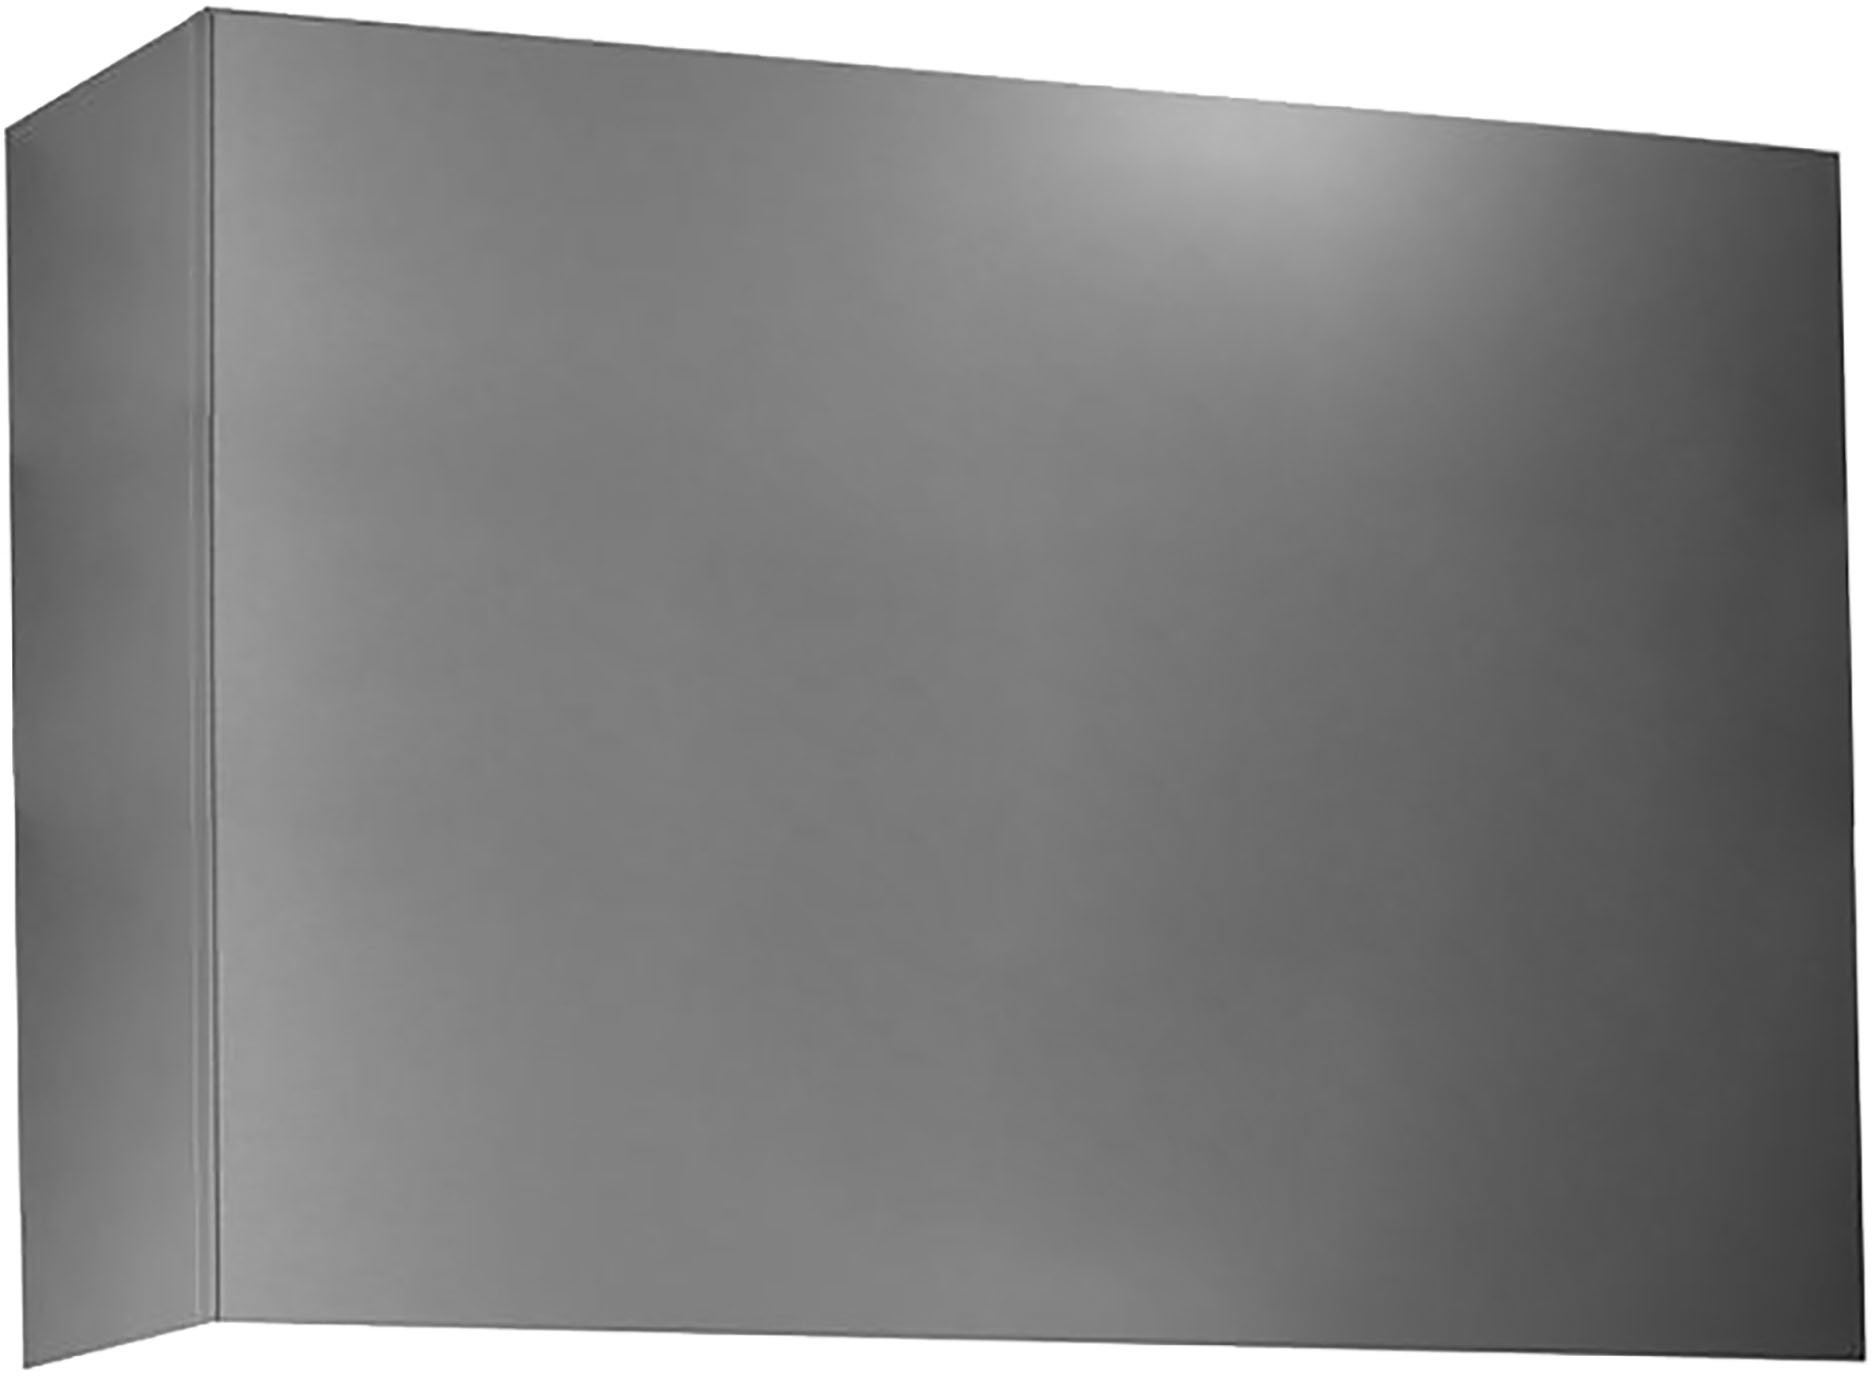 Angle View: Zephyr - Duct Cover Extension for AK7554CS in Stainless Steel for Range Hood - Stainless steel